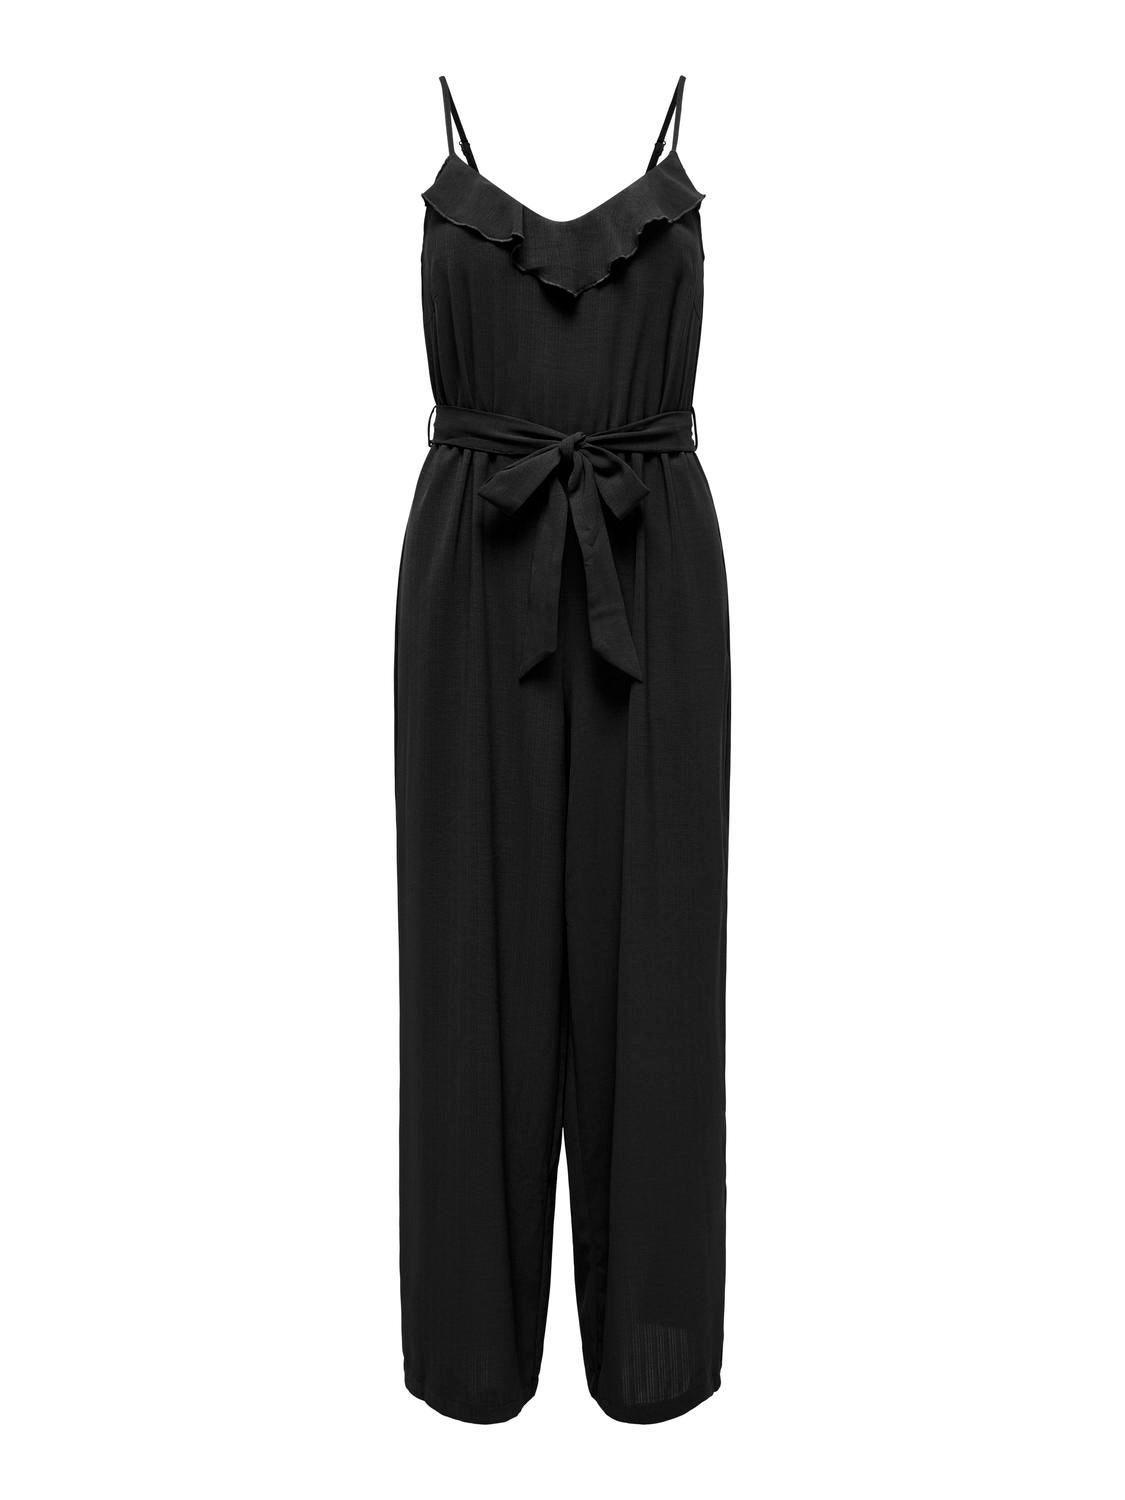 ONLY Jumpsuit with narrow straps -Black - 15325078